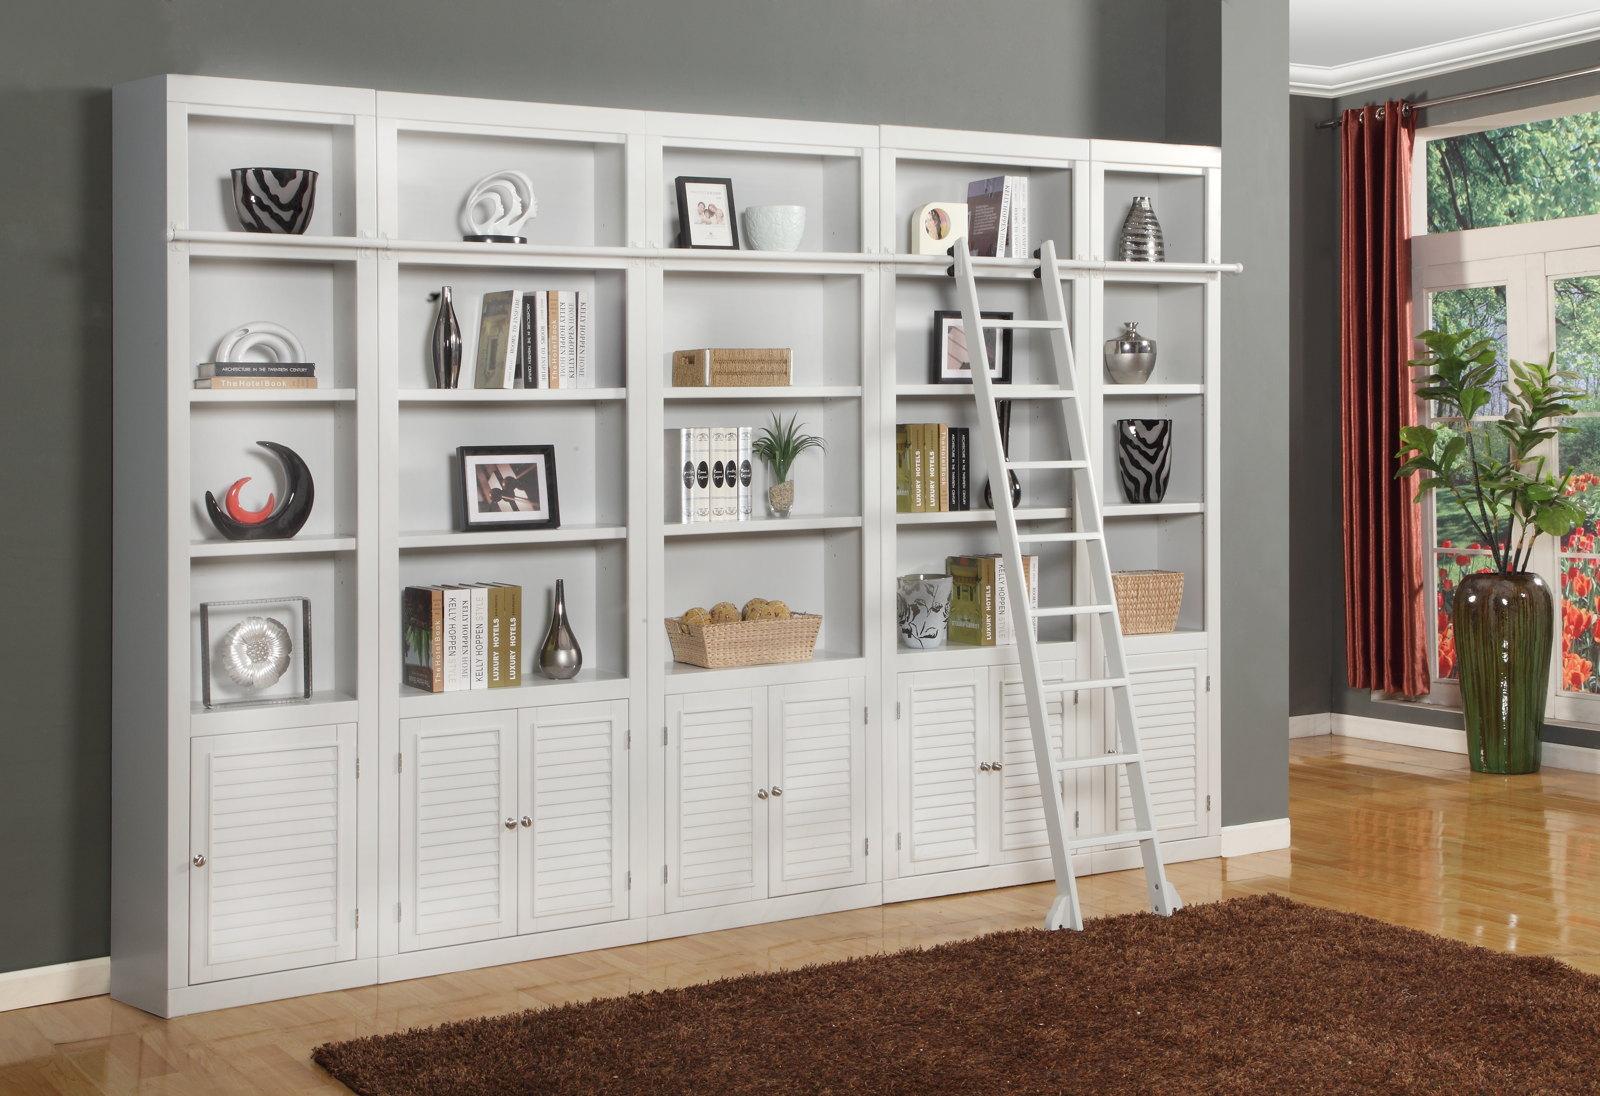 Parker House Boca 6-Piece Inset Bookcase Wall with Ladder in Cottage White